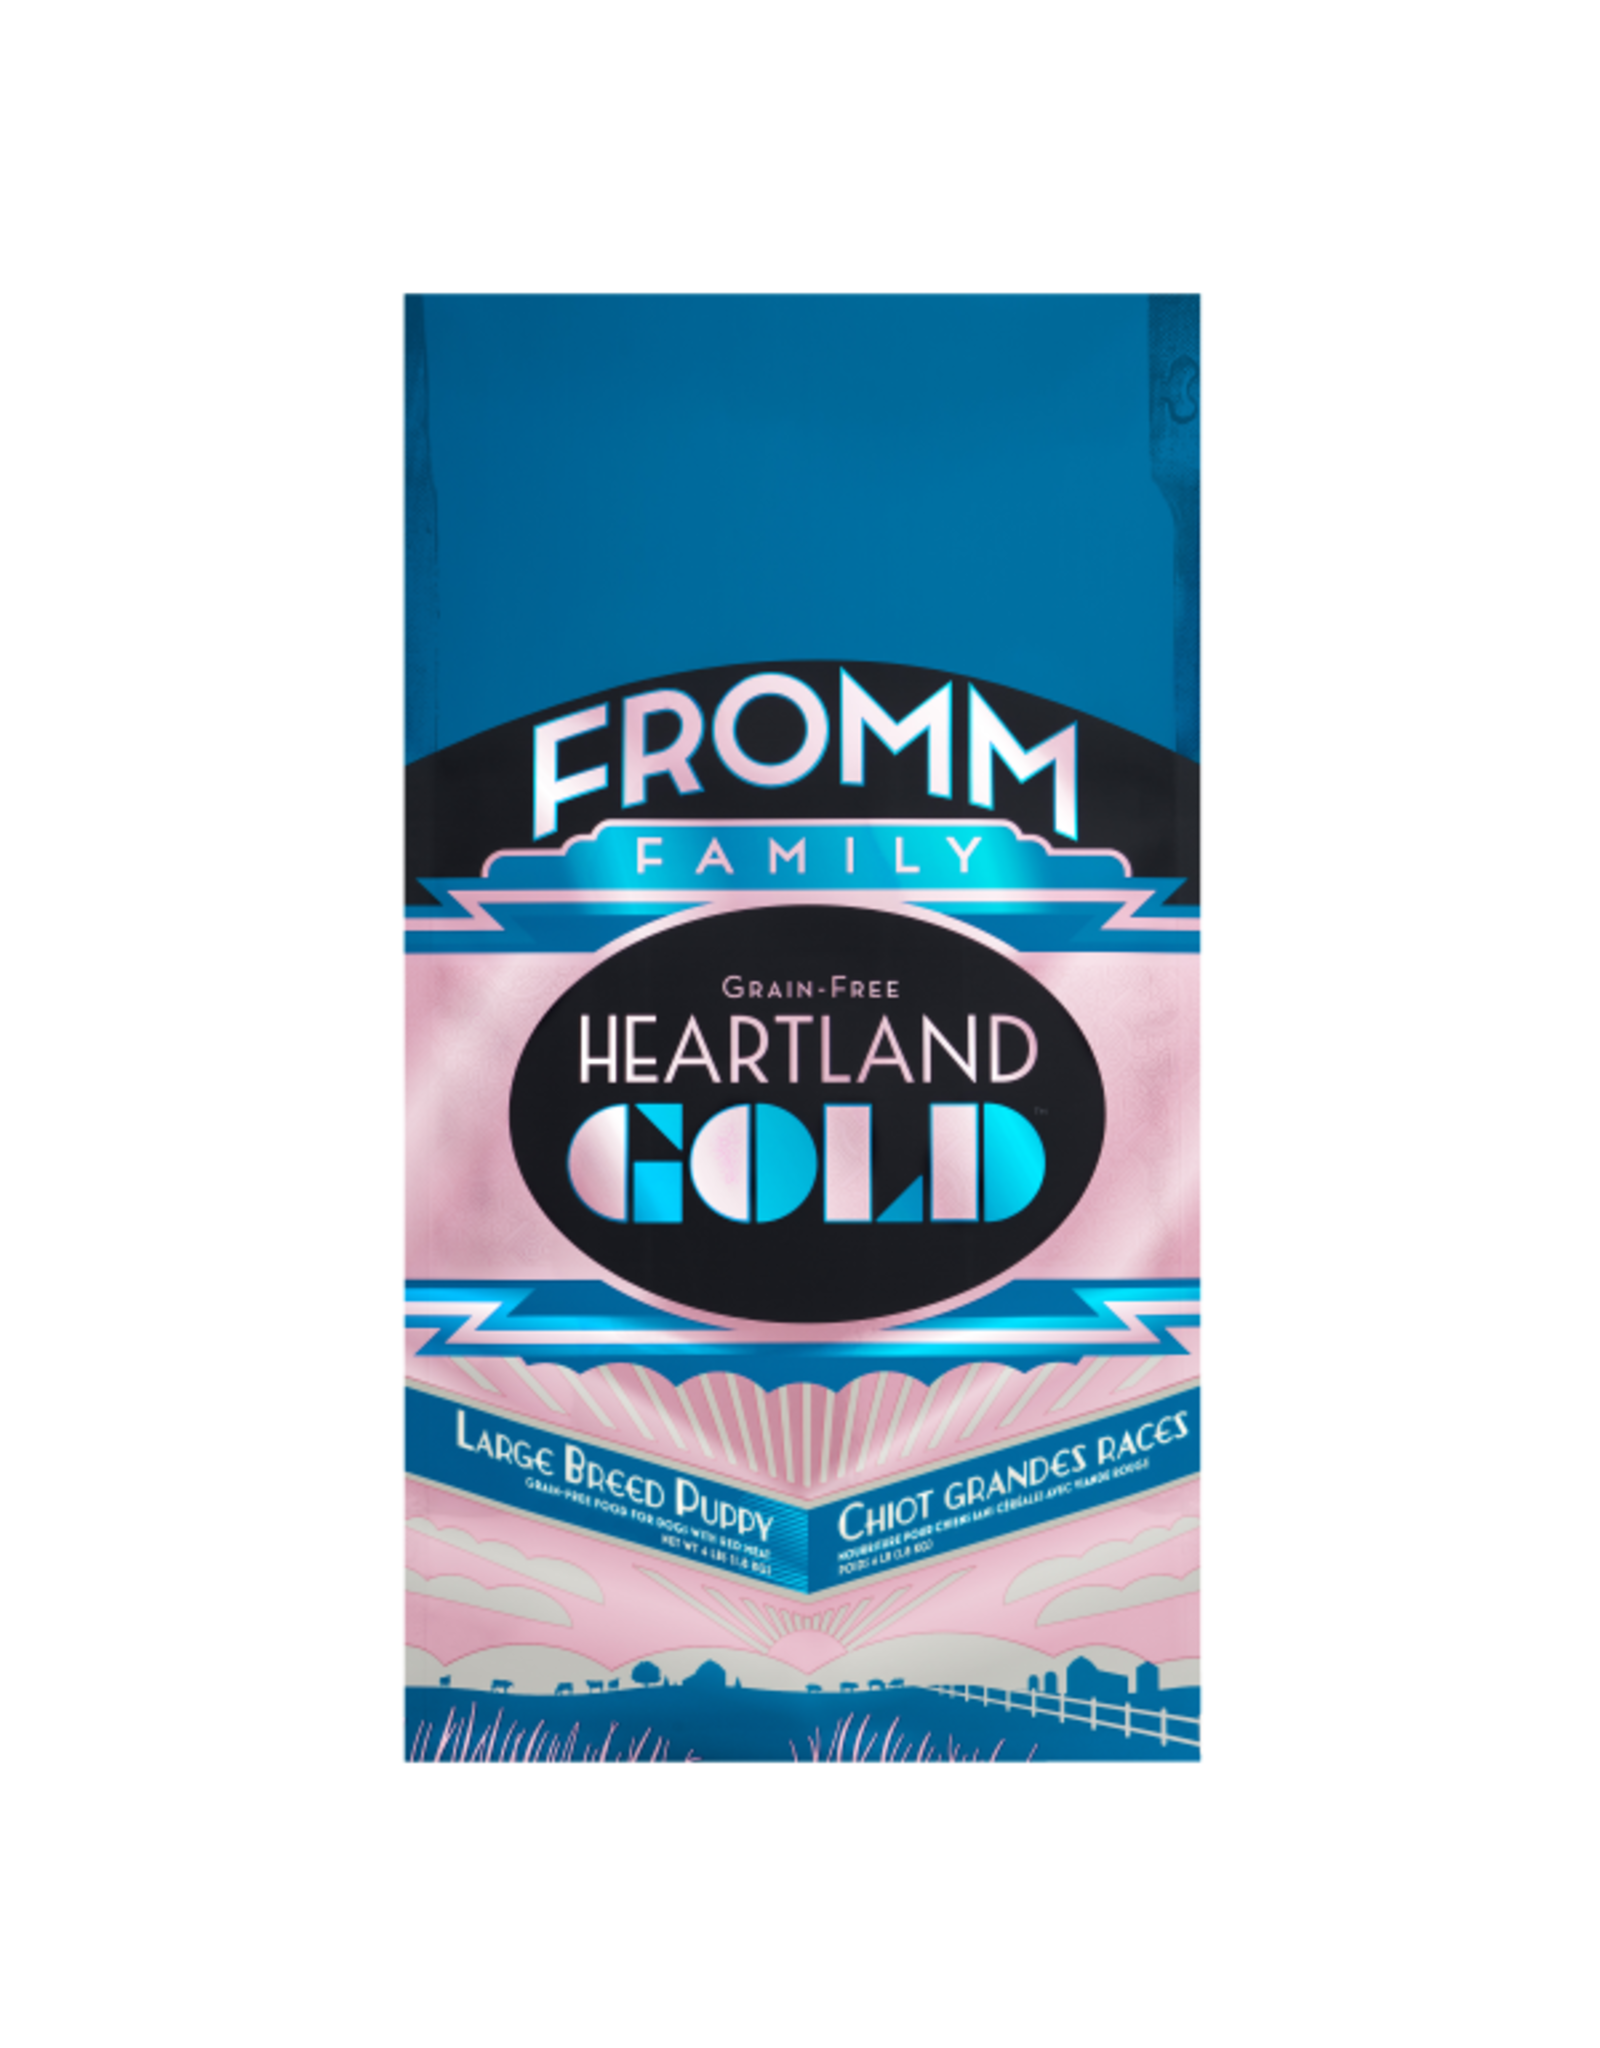 Fromm Heartland Gold Large Breed Puppy 1.8Kg